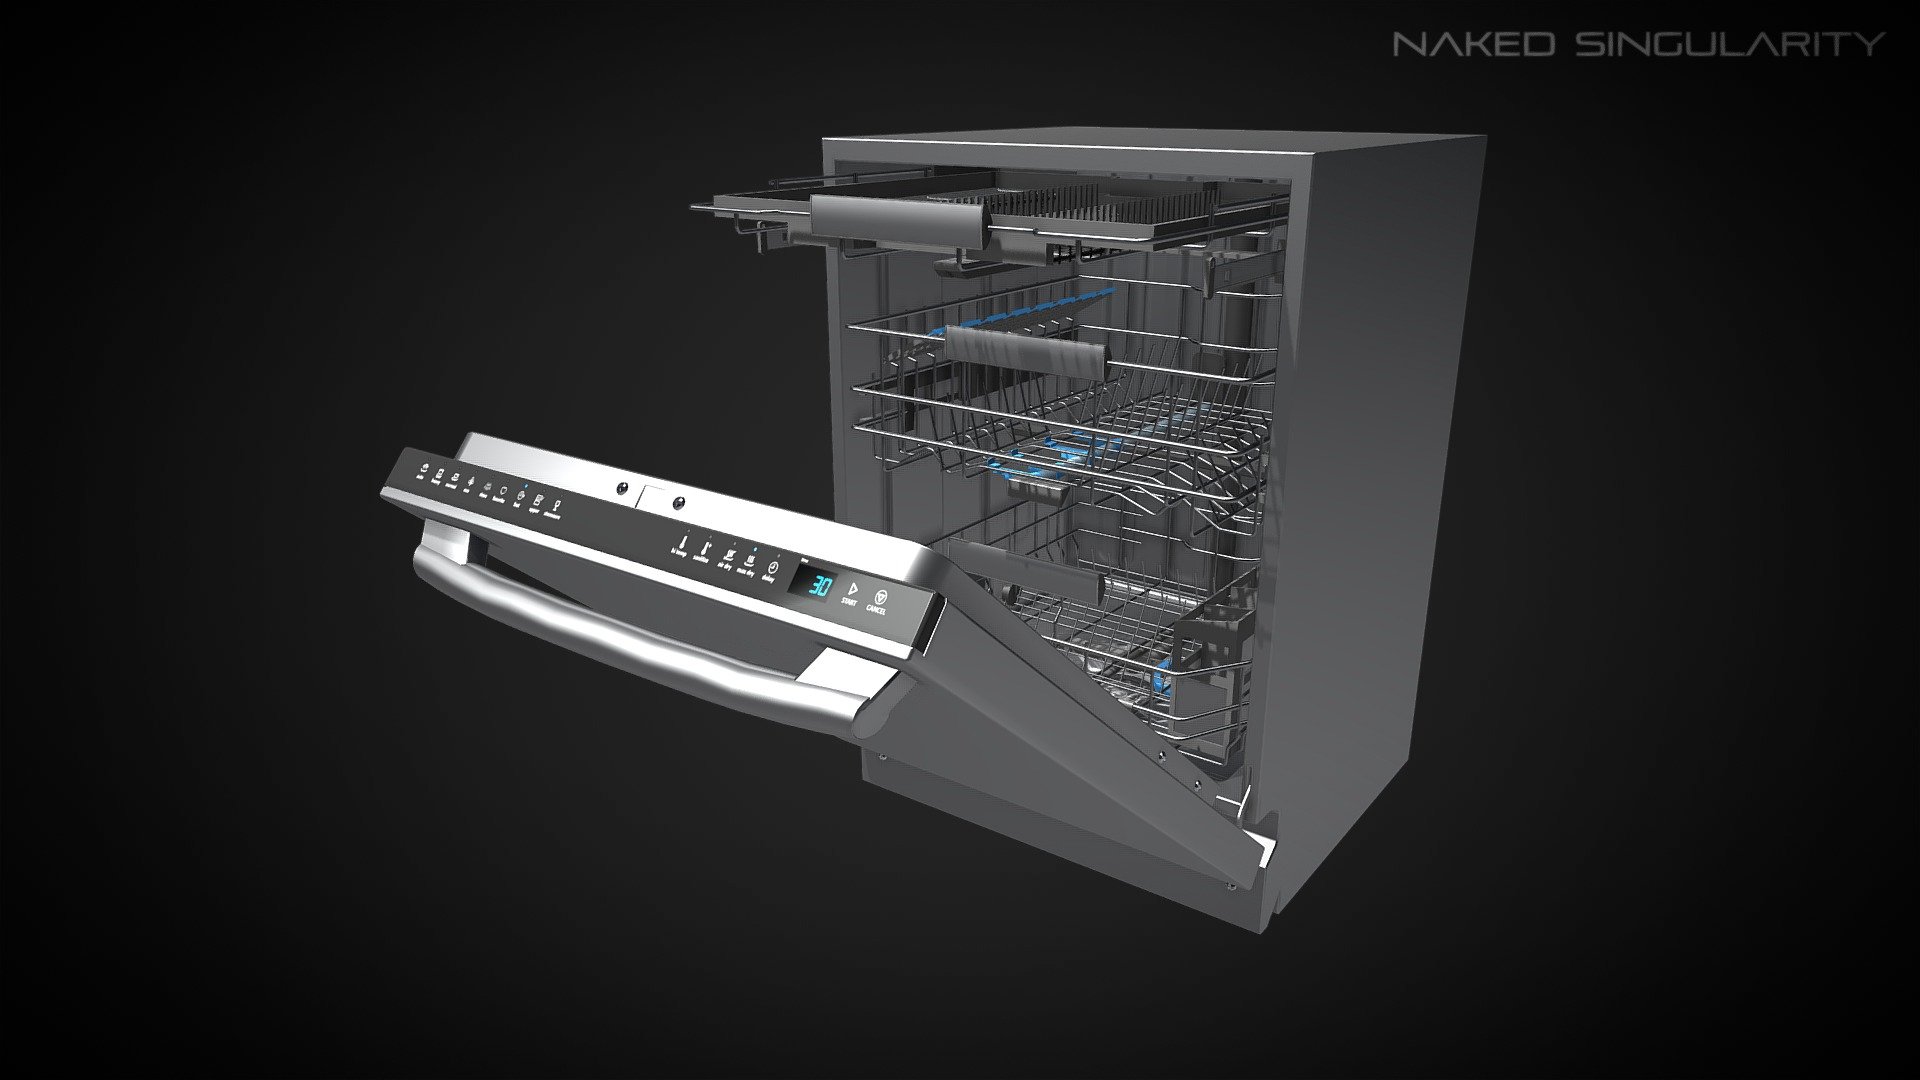 Dish Washer | Appliance / Electronic Lowpoly




High quality lowpoly model.

Parts are seperated so you can create animation in your 3d software.

4K texture.

UV channel 2 unwrapped (for lightmap in Unity, Unreal Engine).

Real world scale.

Note: The animations are included but for previewing mainly.

Check out other appliance electronic models here

Customer support: nakedsingularity.studio@gmail.com

Follow us on: Youtube | Facebook | Instagram | Twitter | Artstation - Dish Washer | Appliance / Electronic Lowpoly - Buy Royalty Free 3D model by Naked Singularity Studio (@nakedsingularity) 3d model